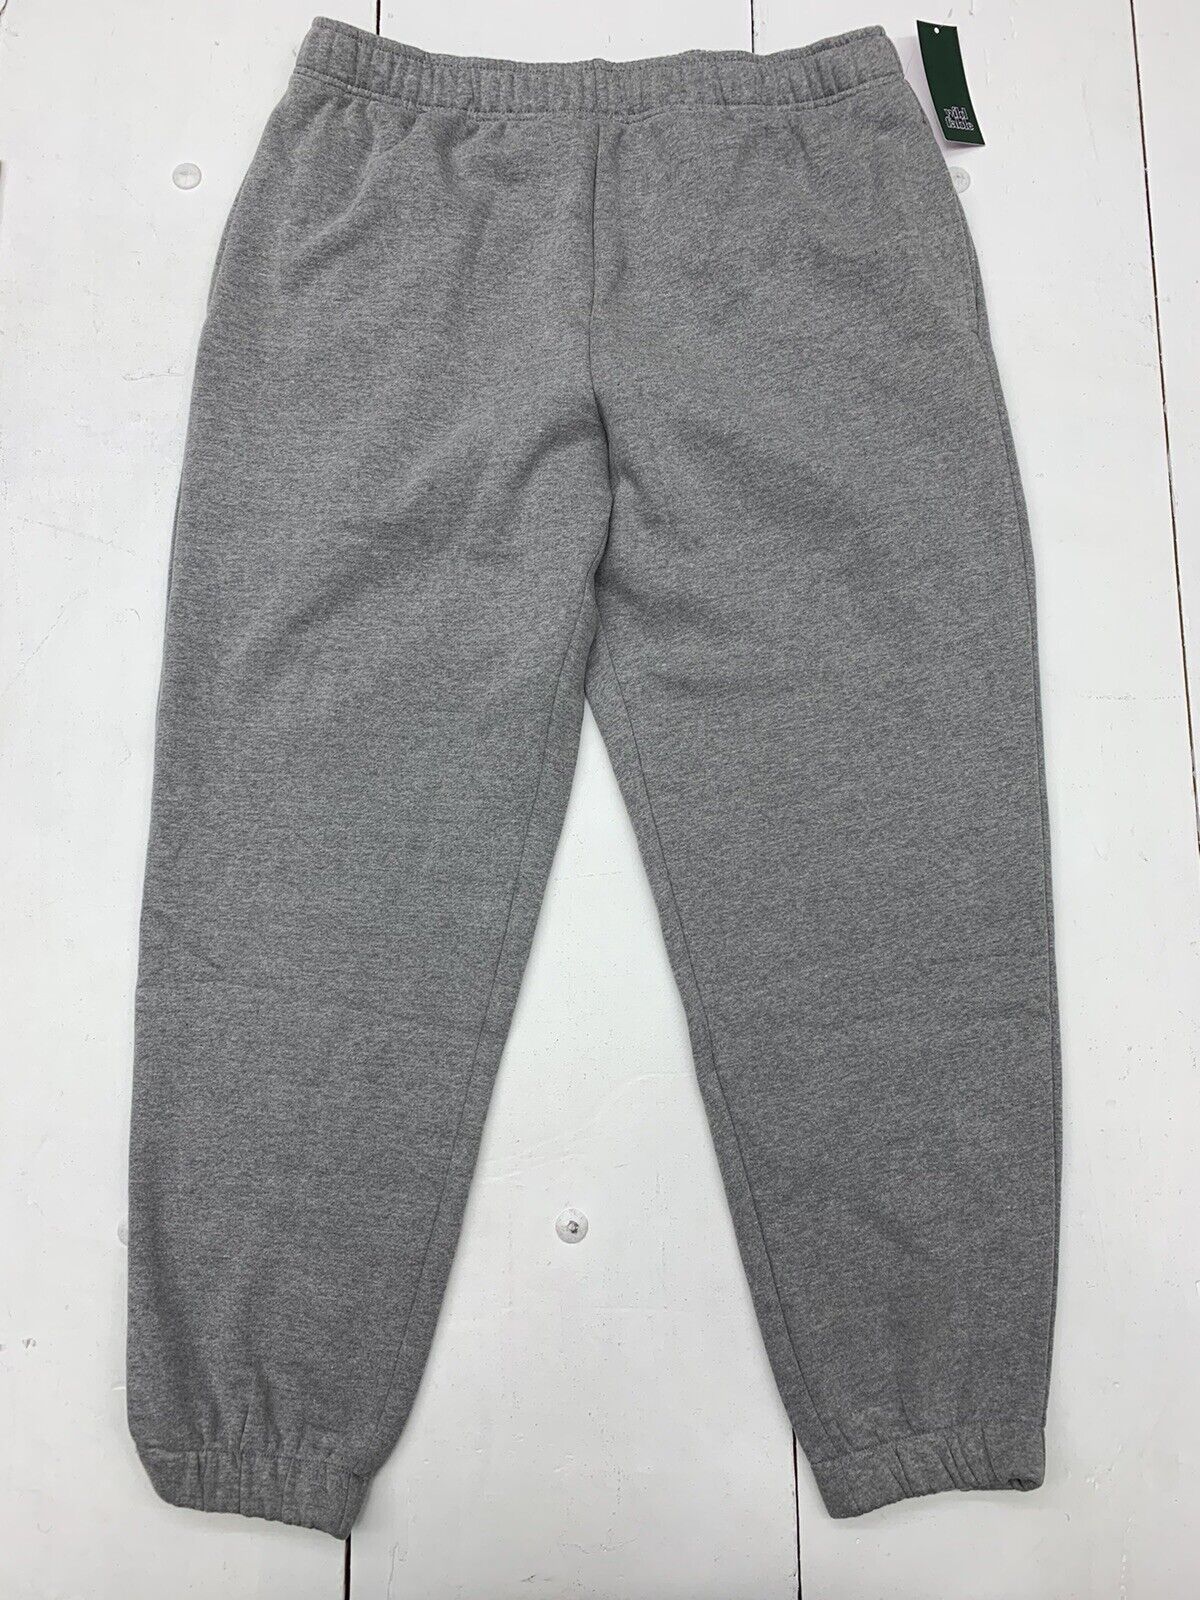 Wild Fable Womens gray Sweatpants Size Large - beyond exchange